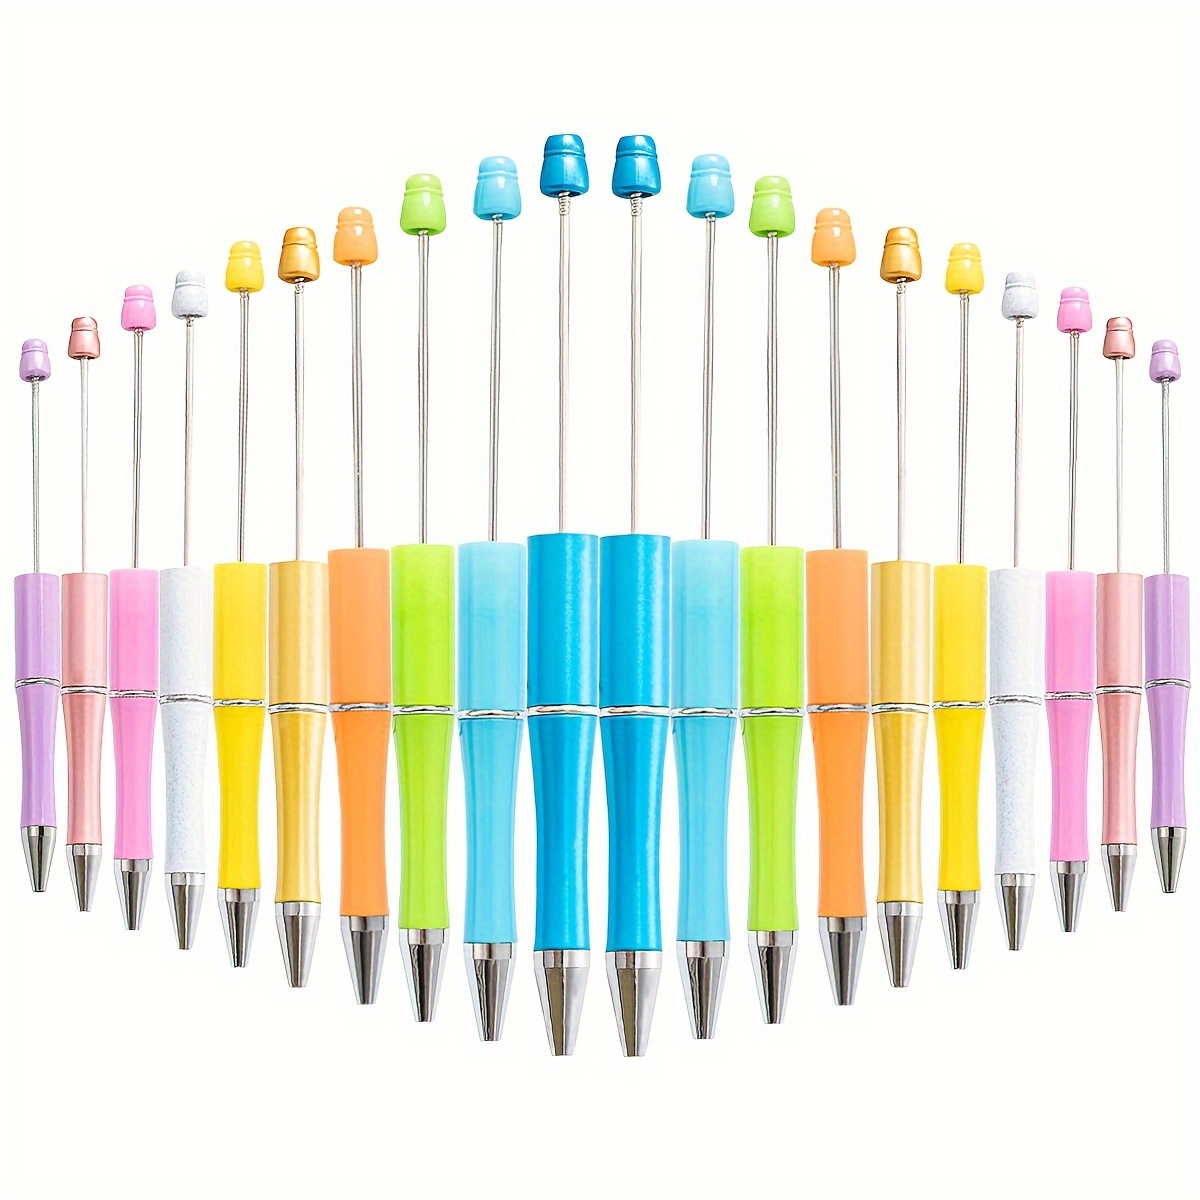 Wholesale Customizable USA Japen Bead Pen For Lampwork And Writing Add Your  Own B Perler Bead Pen To Your Craft Kit From Feida98, $0.39